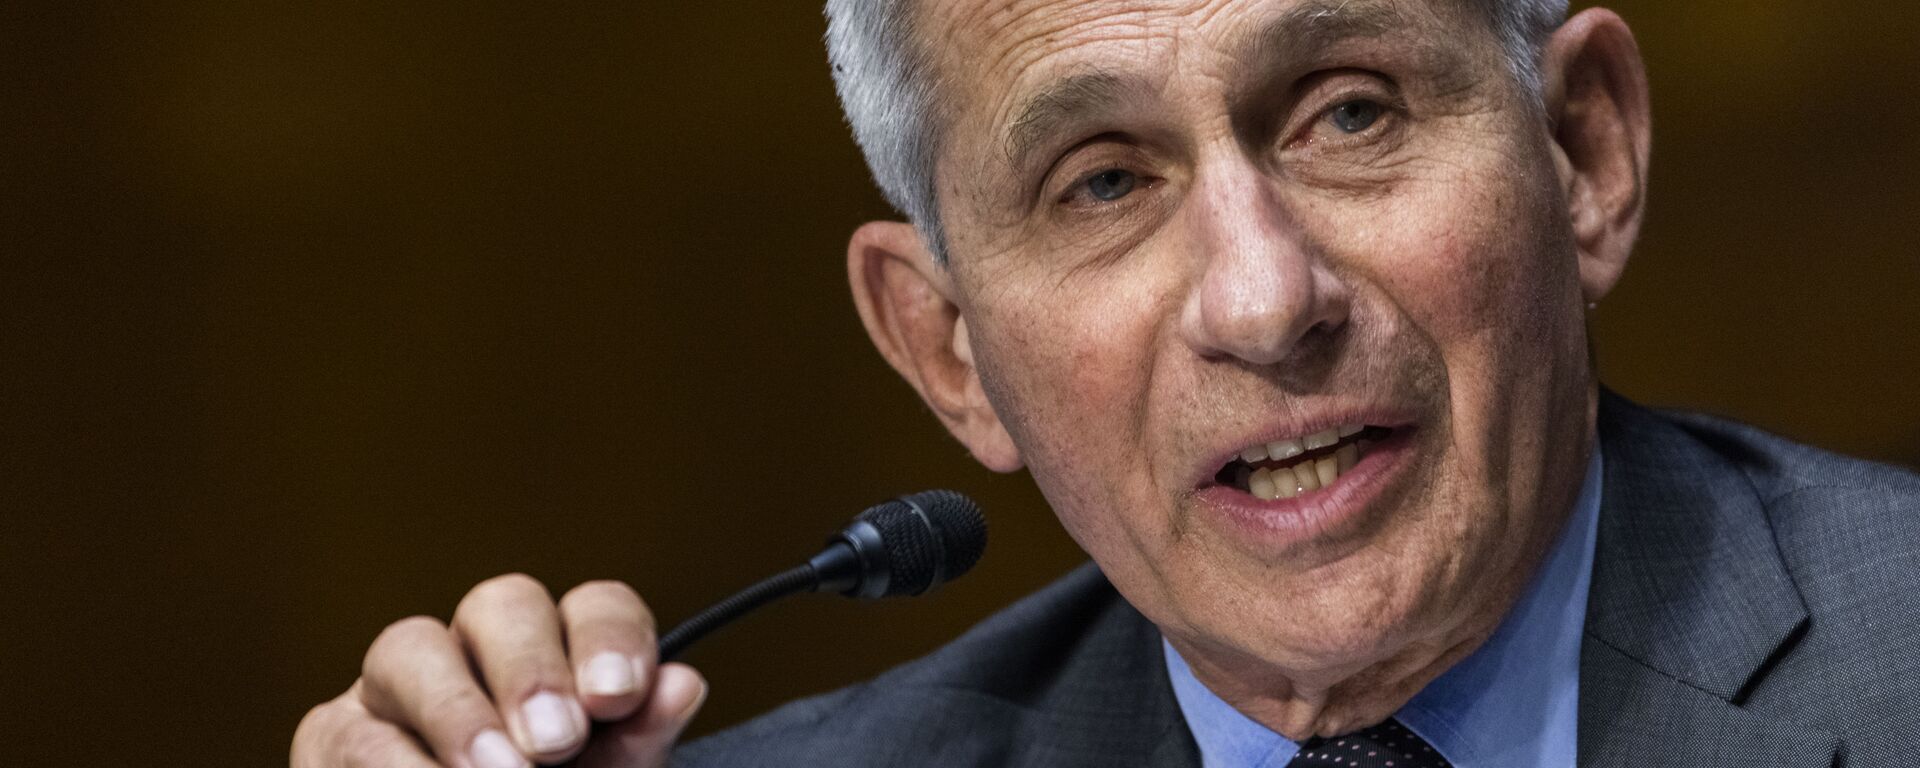 In this May 11, 2021, file photo, Dr. Anthony Fauci, director of the National Institute of Allergy and Infectious Diseases, speaks during hearing on Capitol Hill in Washington - Sputnik International, 1920, 17.05.2022